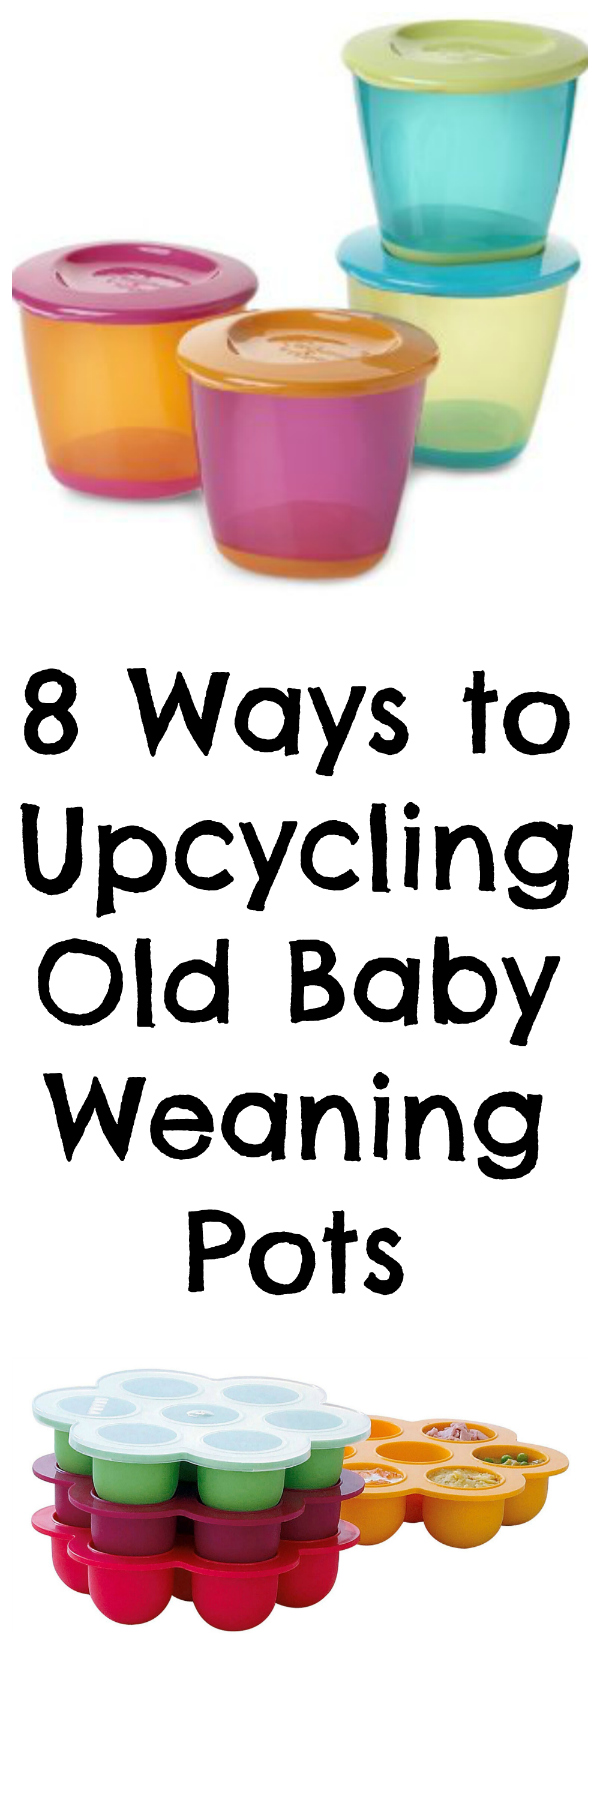 8 ways to up cycle your baby weaning pots, life hacks for mum via Toby & Roo :: daily inspiration for stylish parents and their kids.